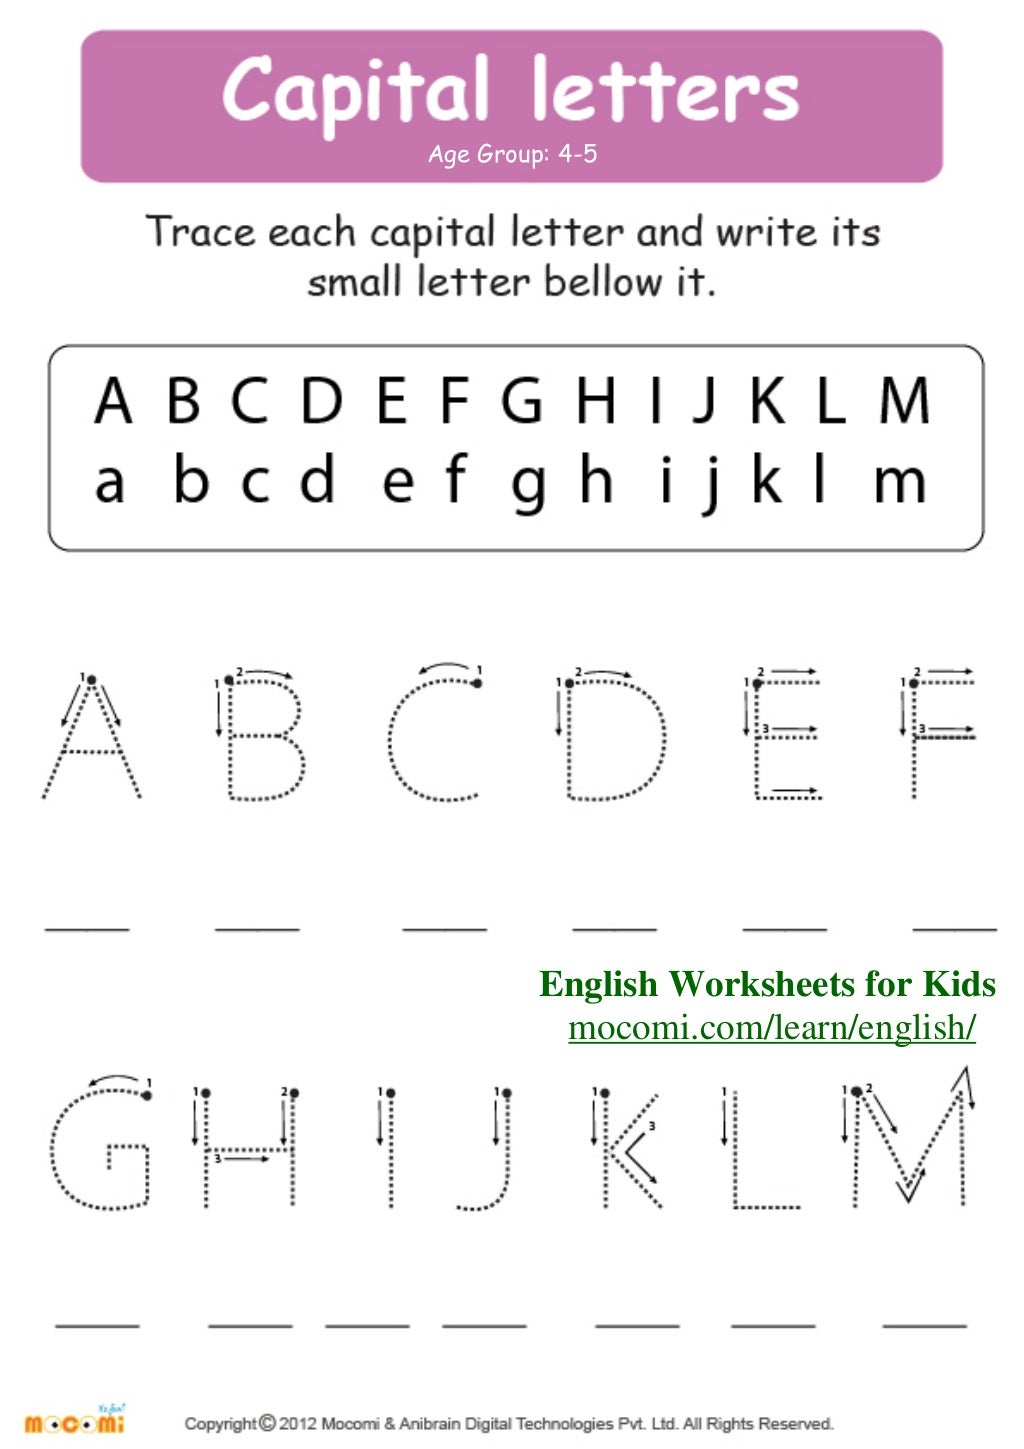 Capital Letters English Worksheets For Kids Mocomi